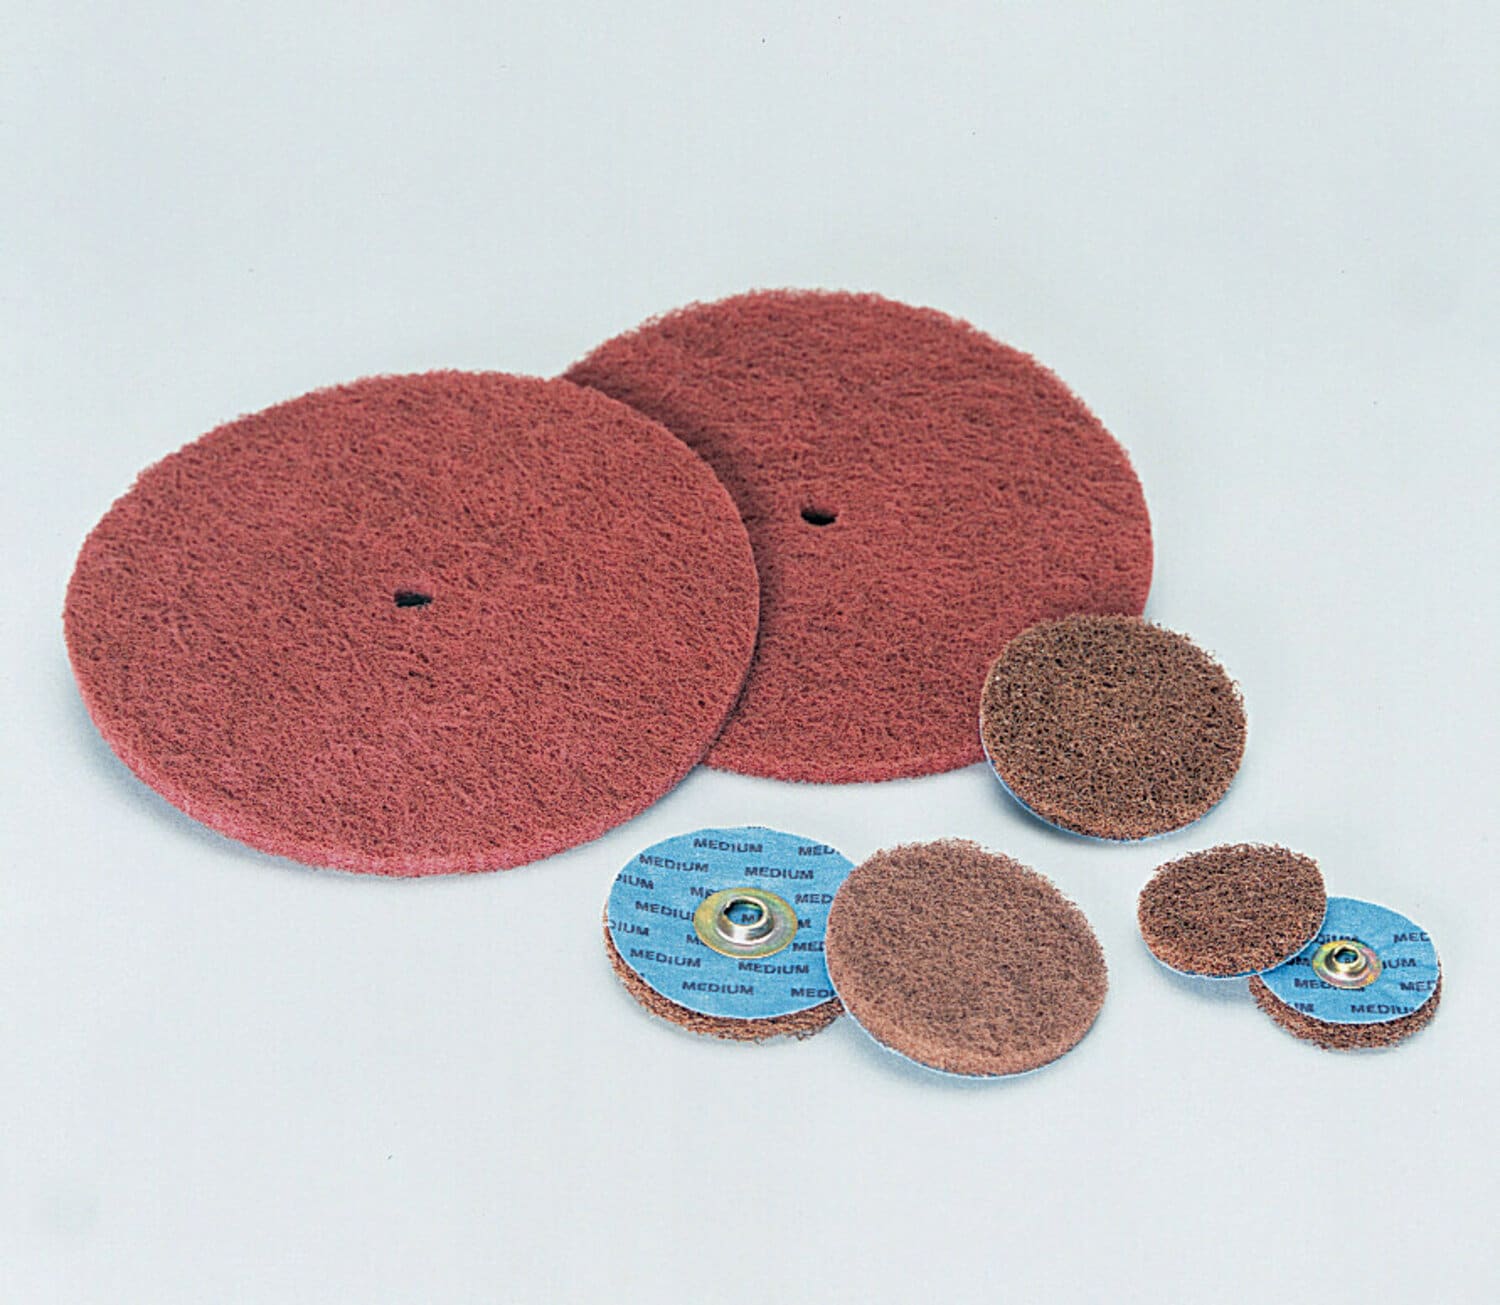 7010368551 - Standard Abrasives Buff and Blend GP Disc, 840910, 8 in x 1/2 in A MED,
10/Pac, 100 ea/Case